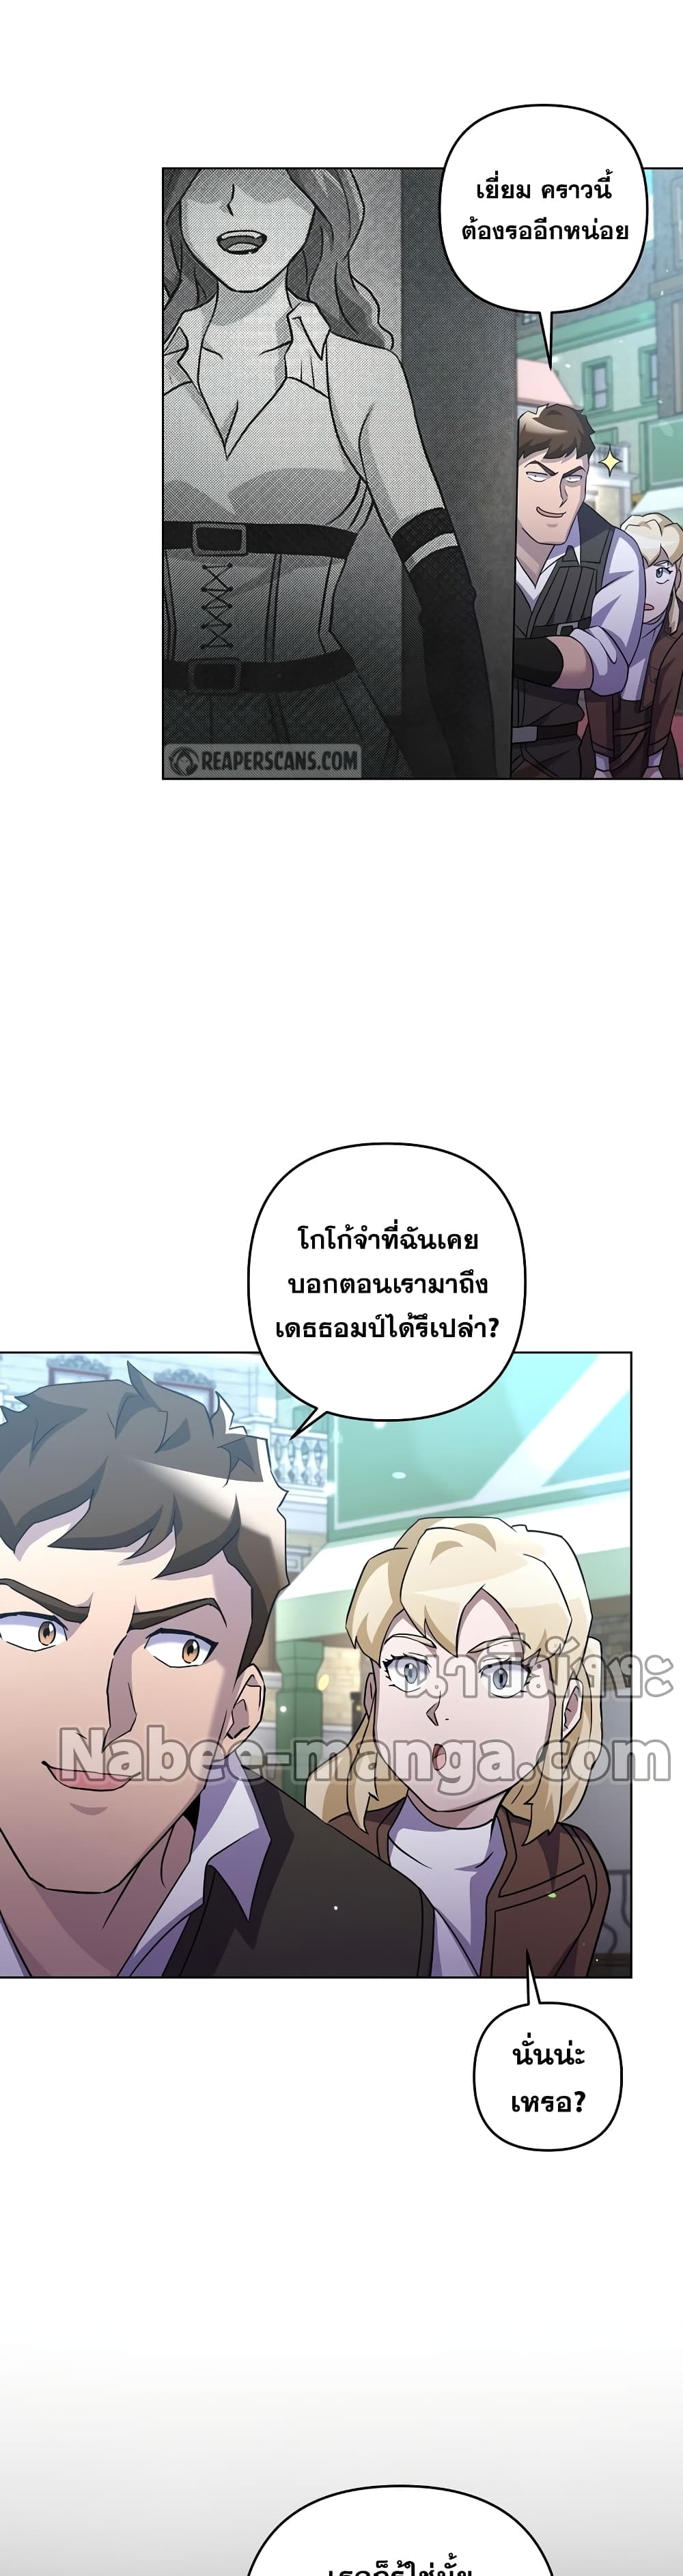 Surviving in an Action Manhwa ตอนที่ 26 (22)